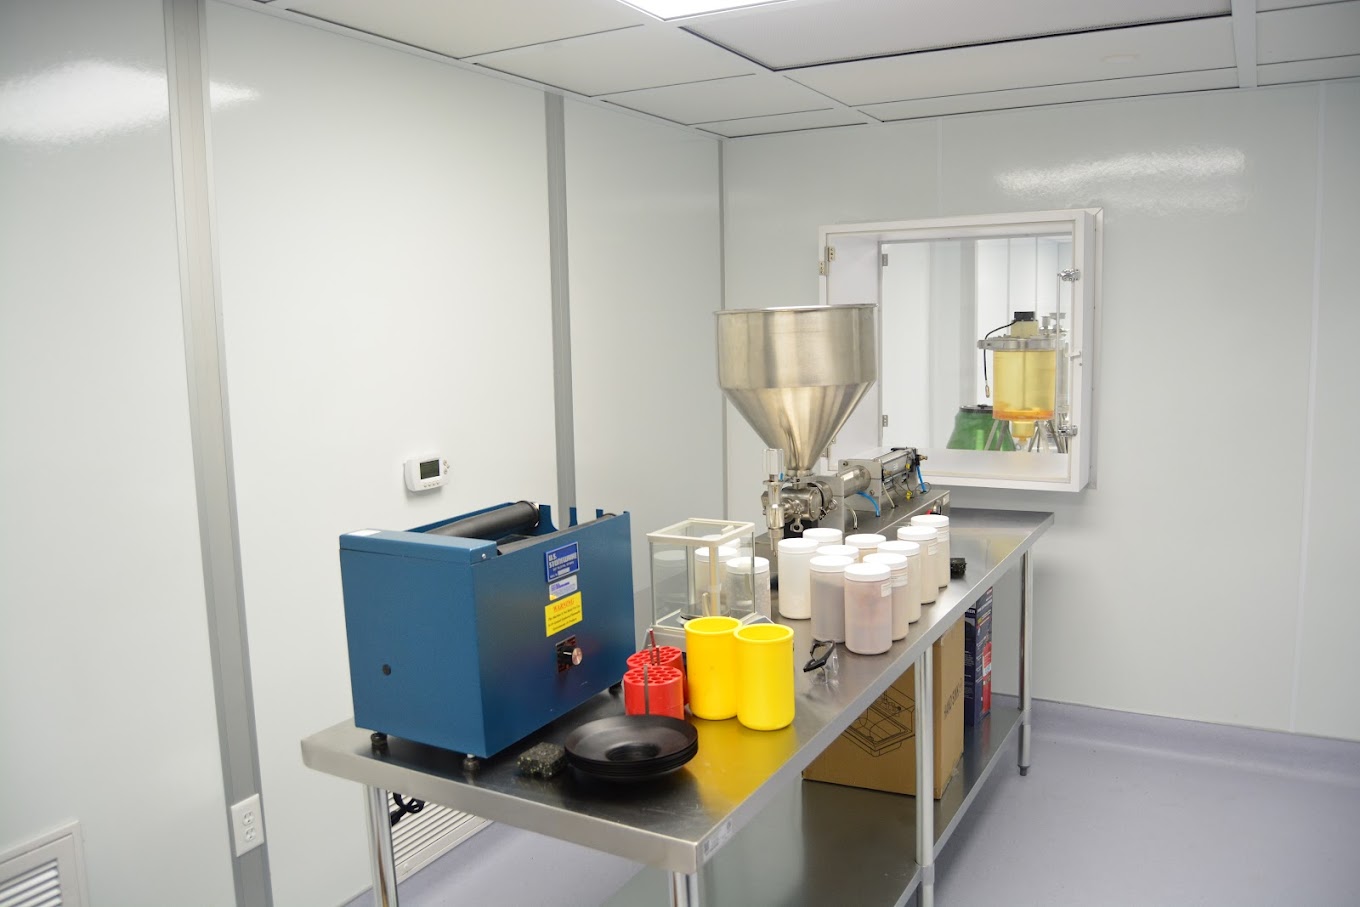 A cleanroom with sterile white walls, a blue machine, a large metal hopper, and various containers on a metal table, adhering to cGMP or GMP standards for pharmaceutical or chemical manufacturing.